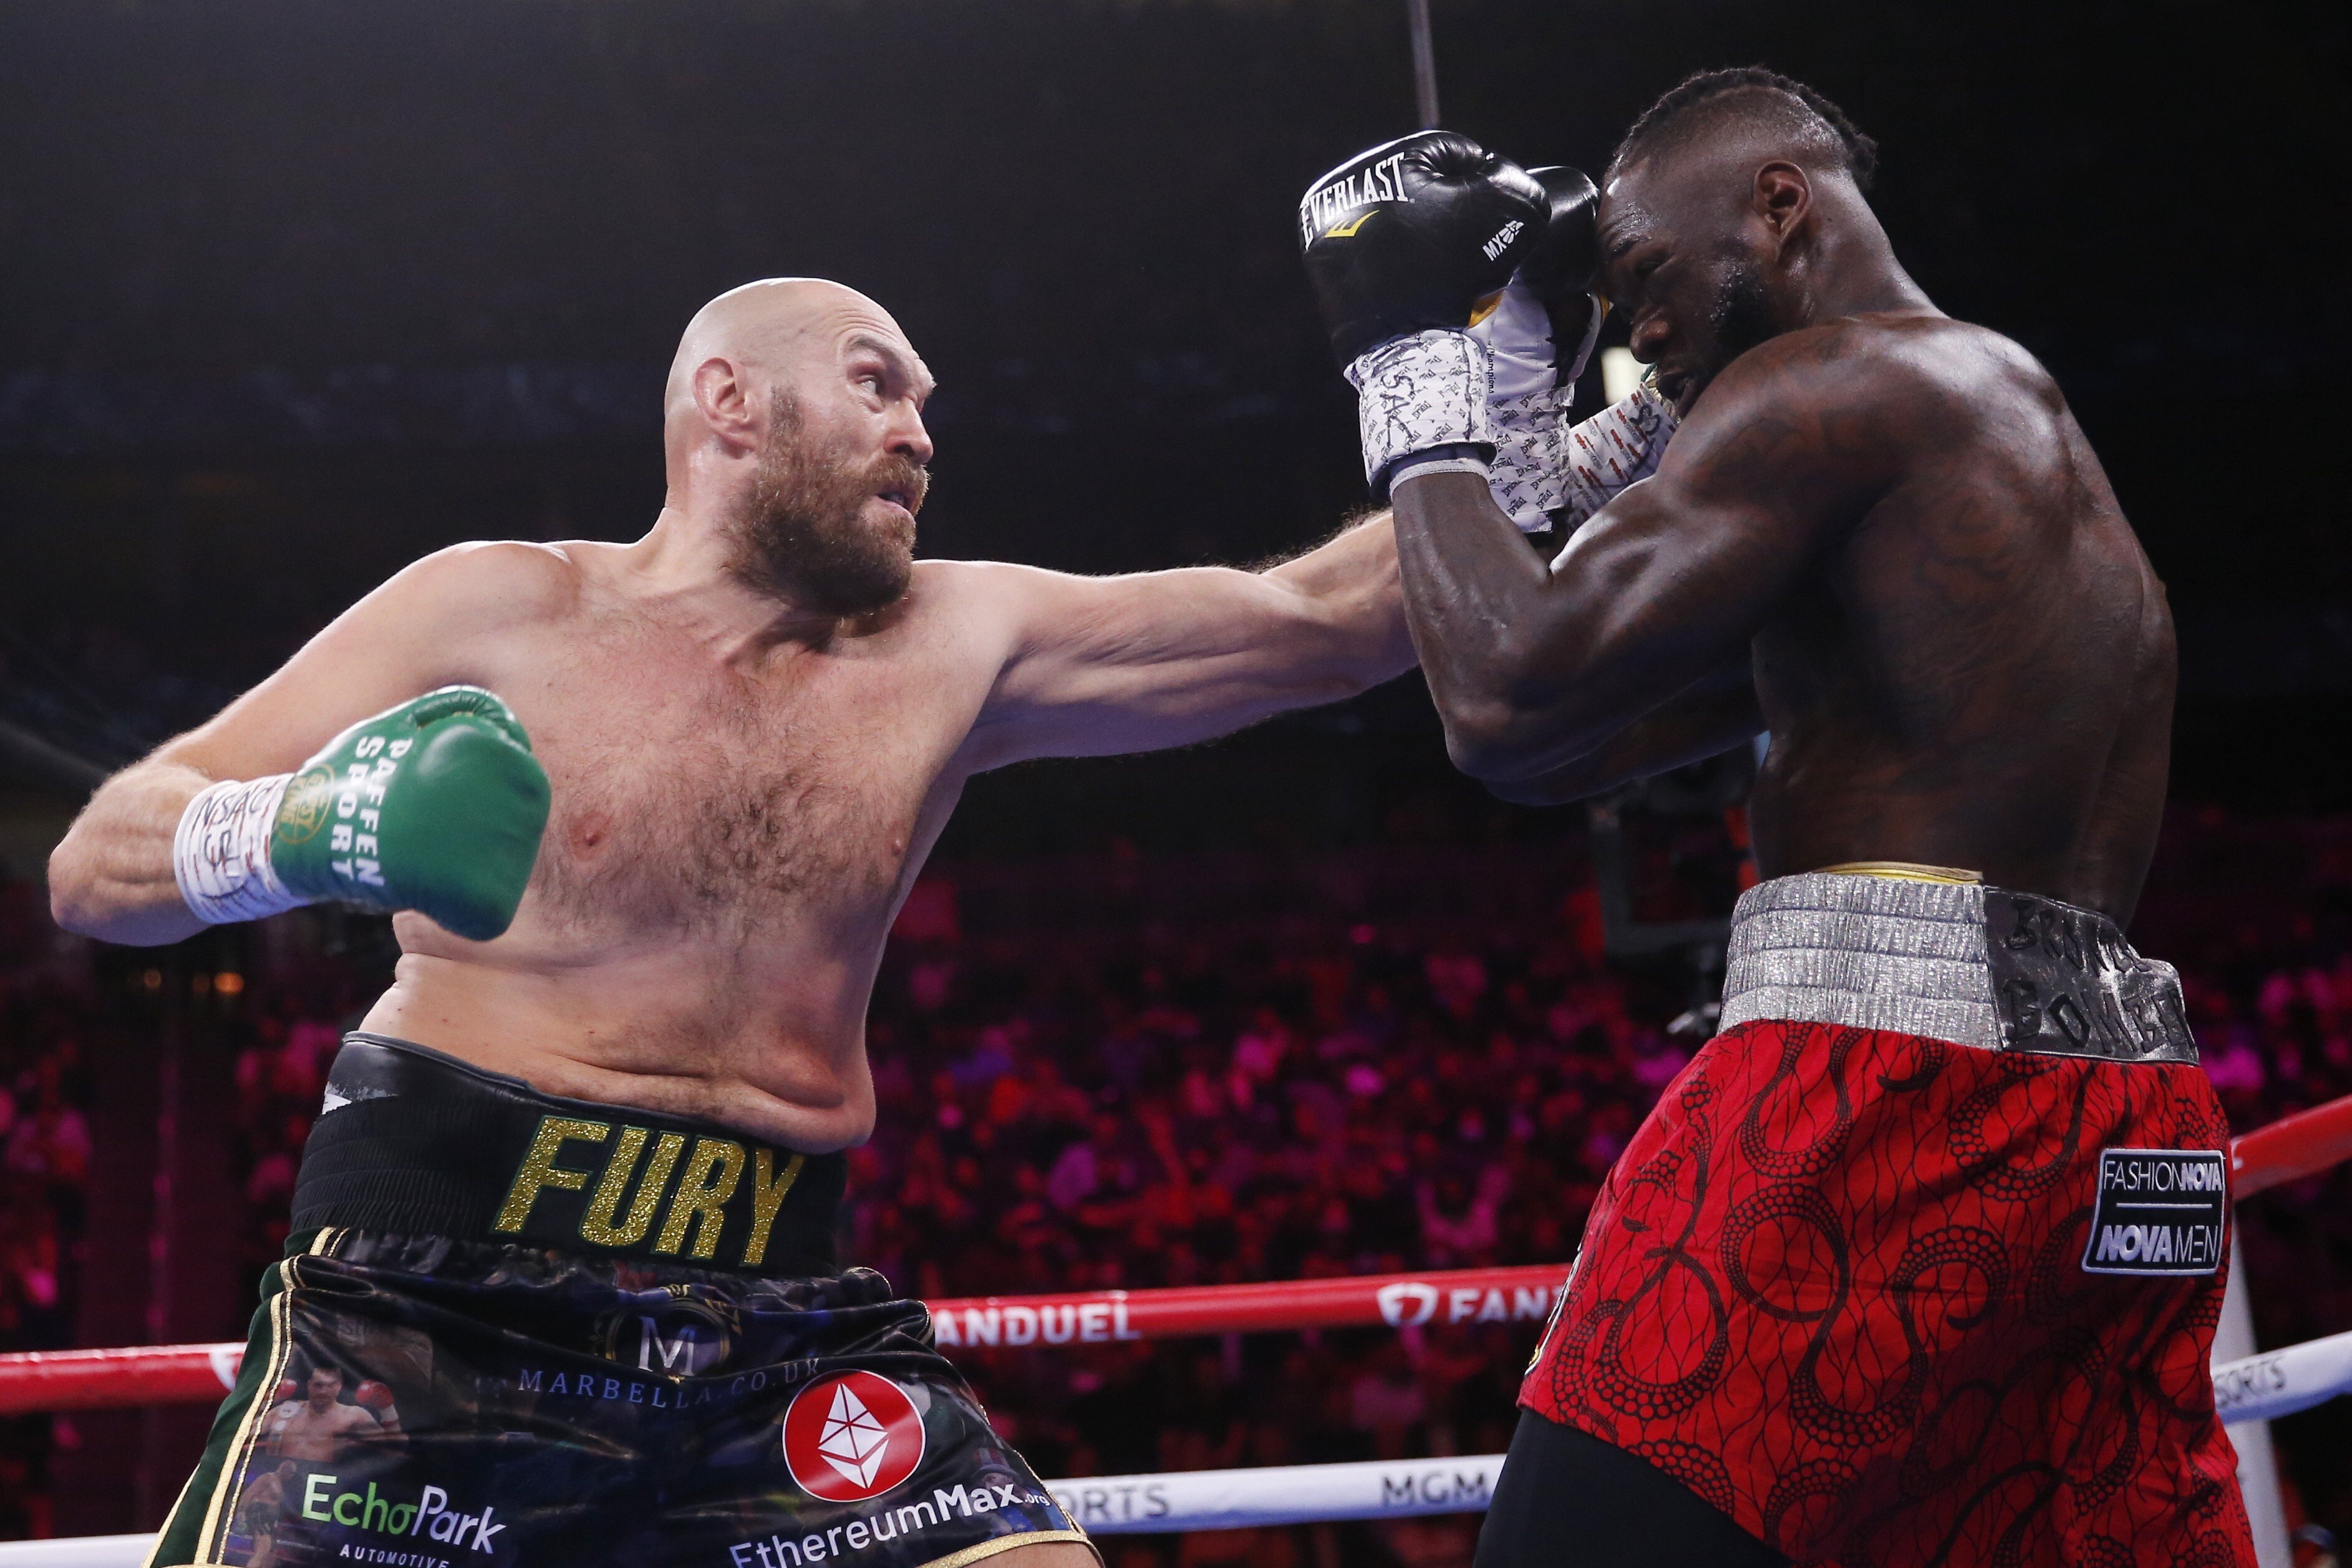 Tyson Fury lands a jab on Deontay Wilder in their heavyweight championship fight. Photo: AP